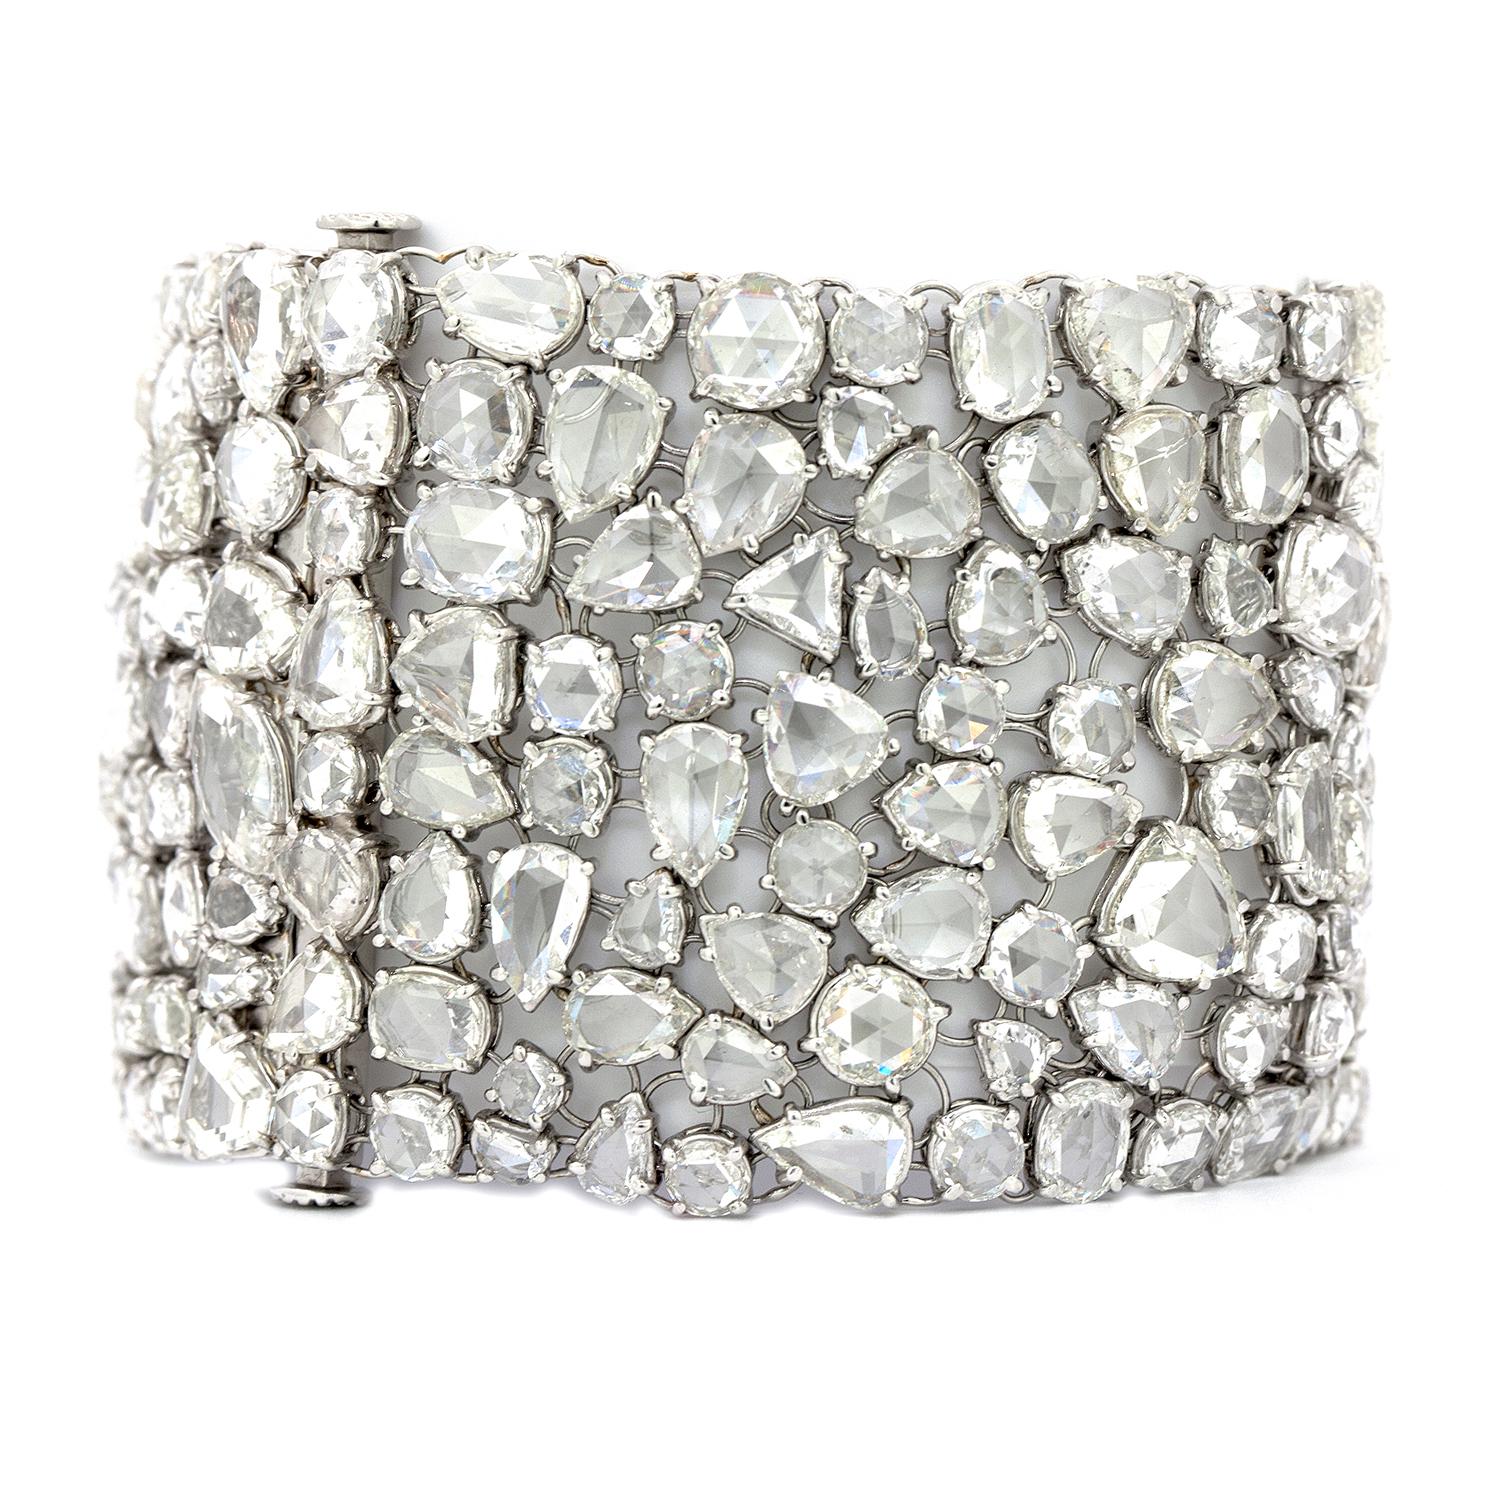 This truly unique, vintage diamond bracelet was expertly crafted in platinum for these 263 mixed shaped rose cut diamonds that weighs 100.37cts in total. The diamonds are graded as H VS/SI1.  Each diamond is individually set in a handmade platinum